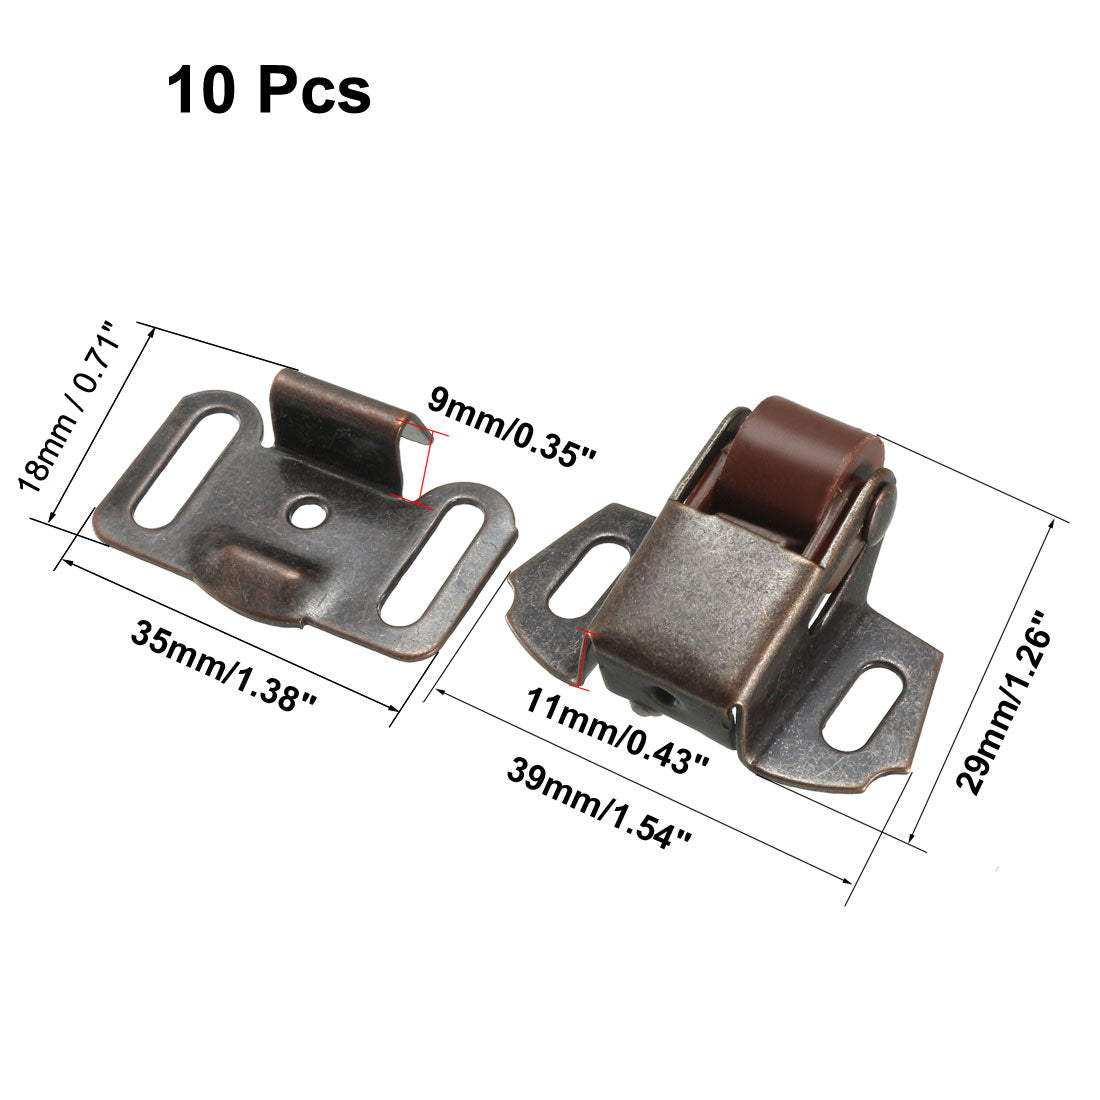 uxcell Uxcell Retro Cabinet Wardrobe Door Single Roller Catch Ball Latch Hardware Copper Tone 10pcs